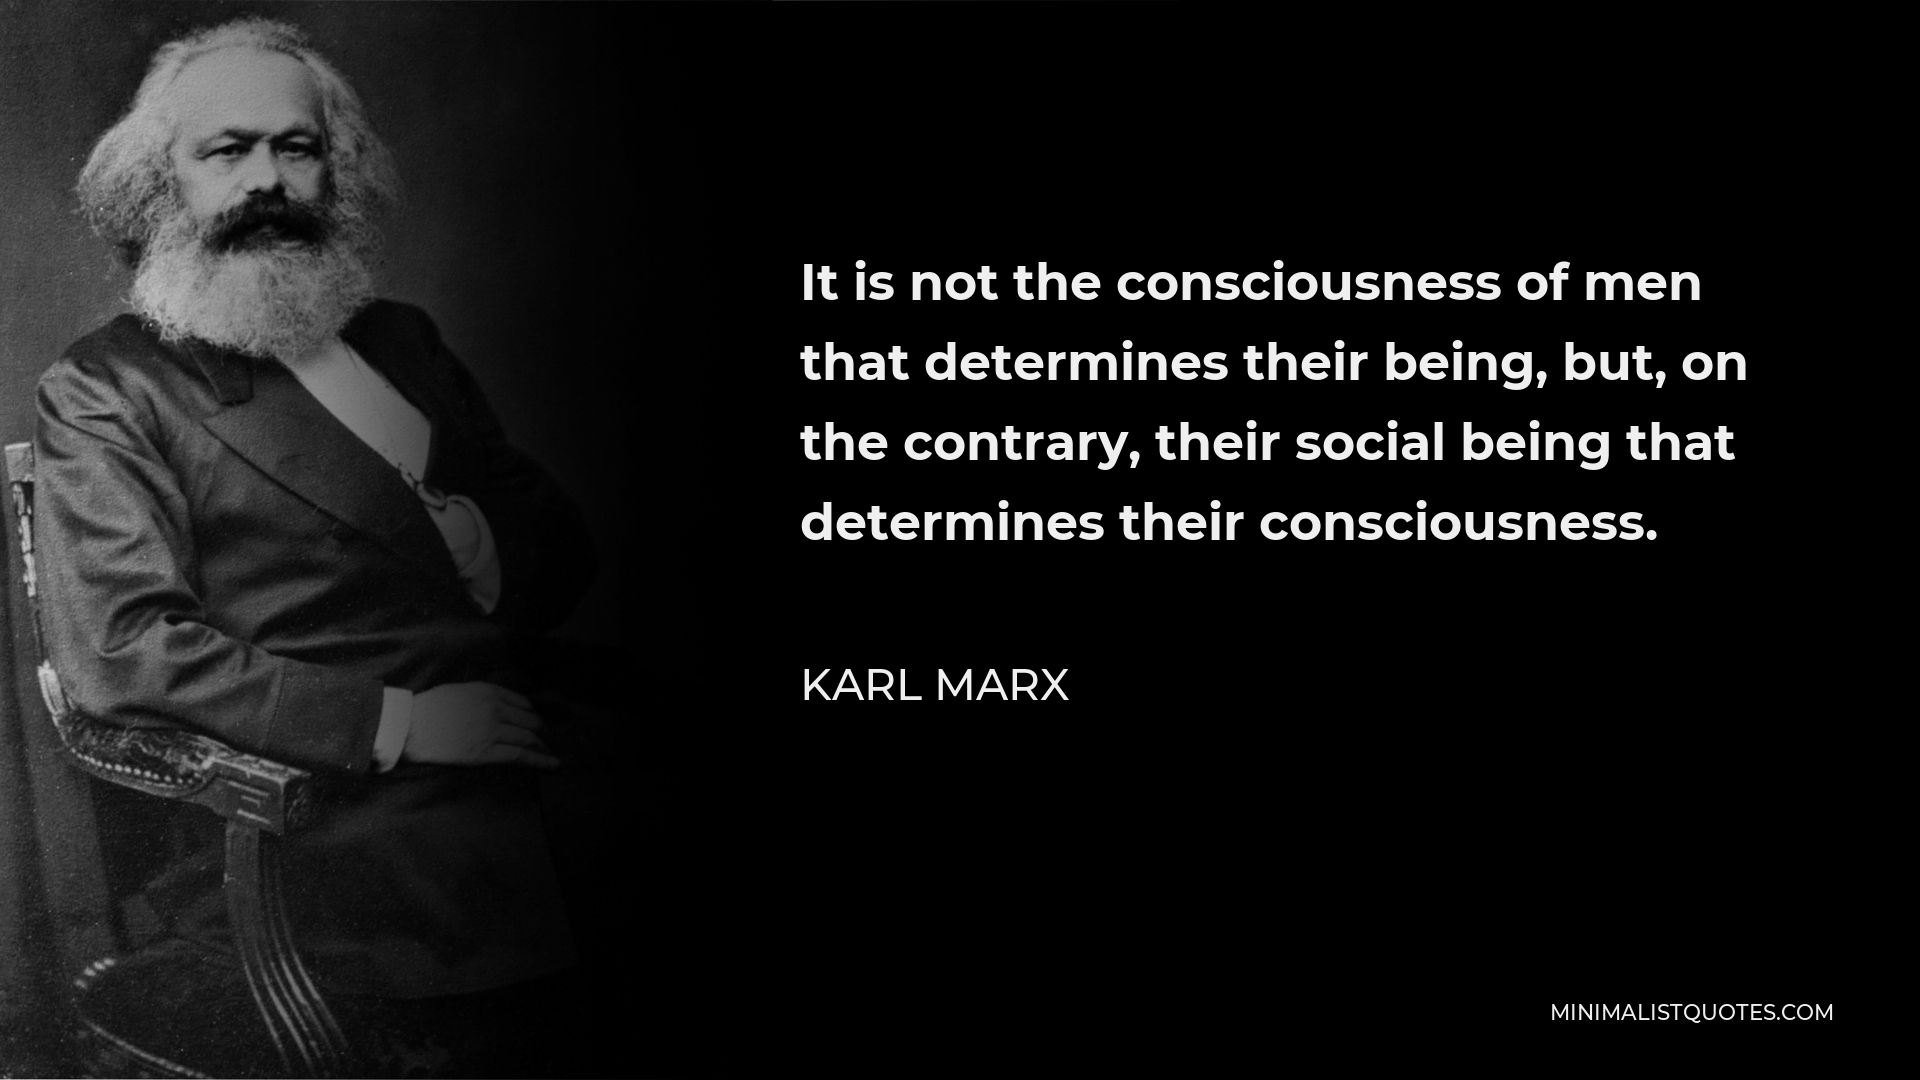 Karl Marx Quote - It is not the consciousness of men that determines their being, but, on the contrary, their social being that determines their consciousness.